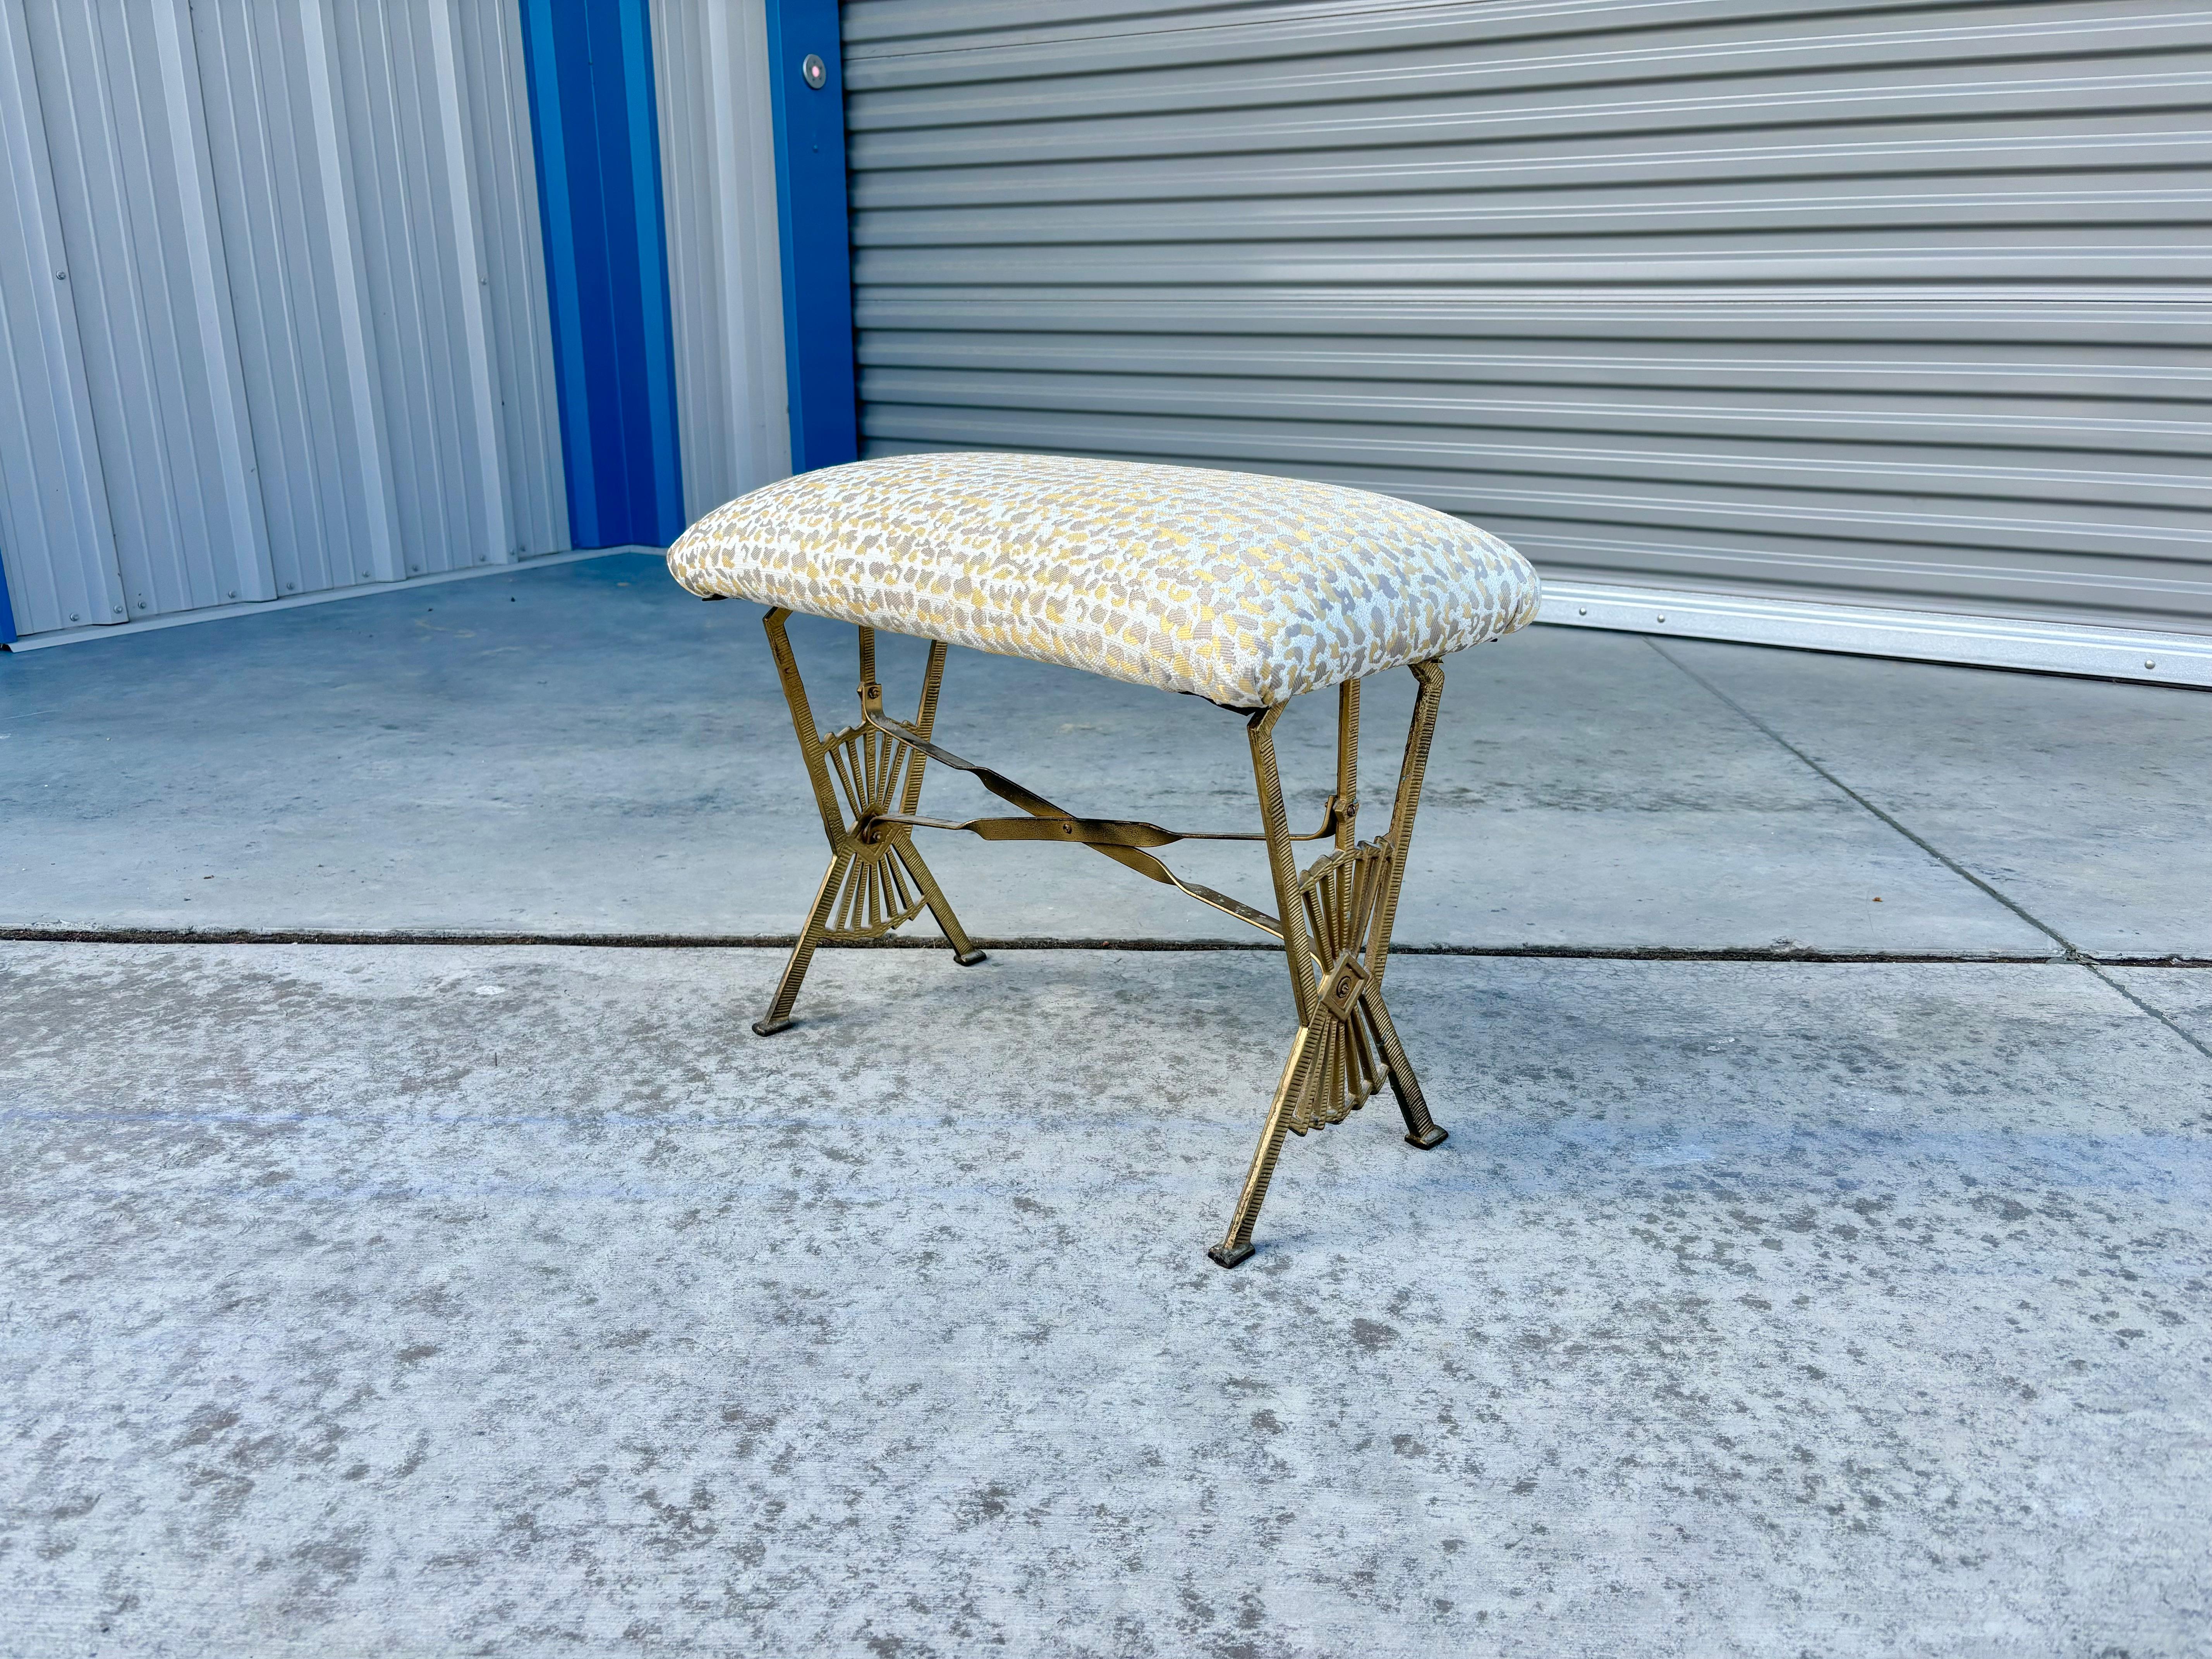 Vintage brass ottoman designed and manufactured in the United States circa 1960s. This stunning ottoman boasts a unique and intricate brass metal base that will catch any discerning individual's eye. The cushion has been recently reupholstered to